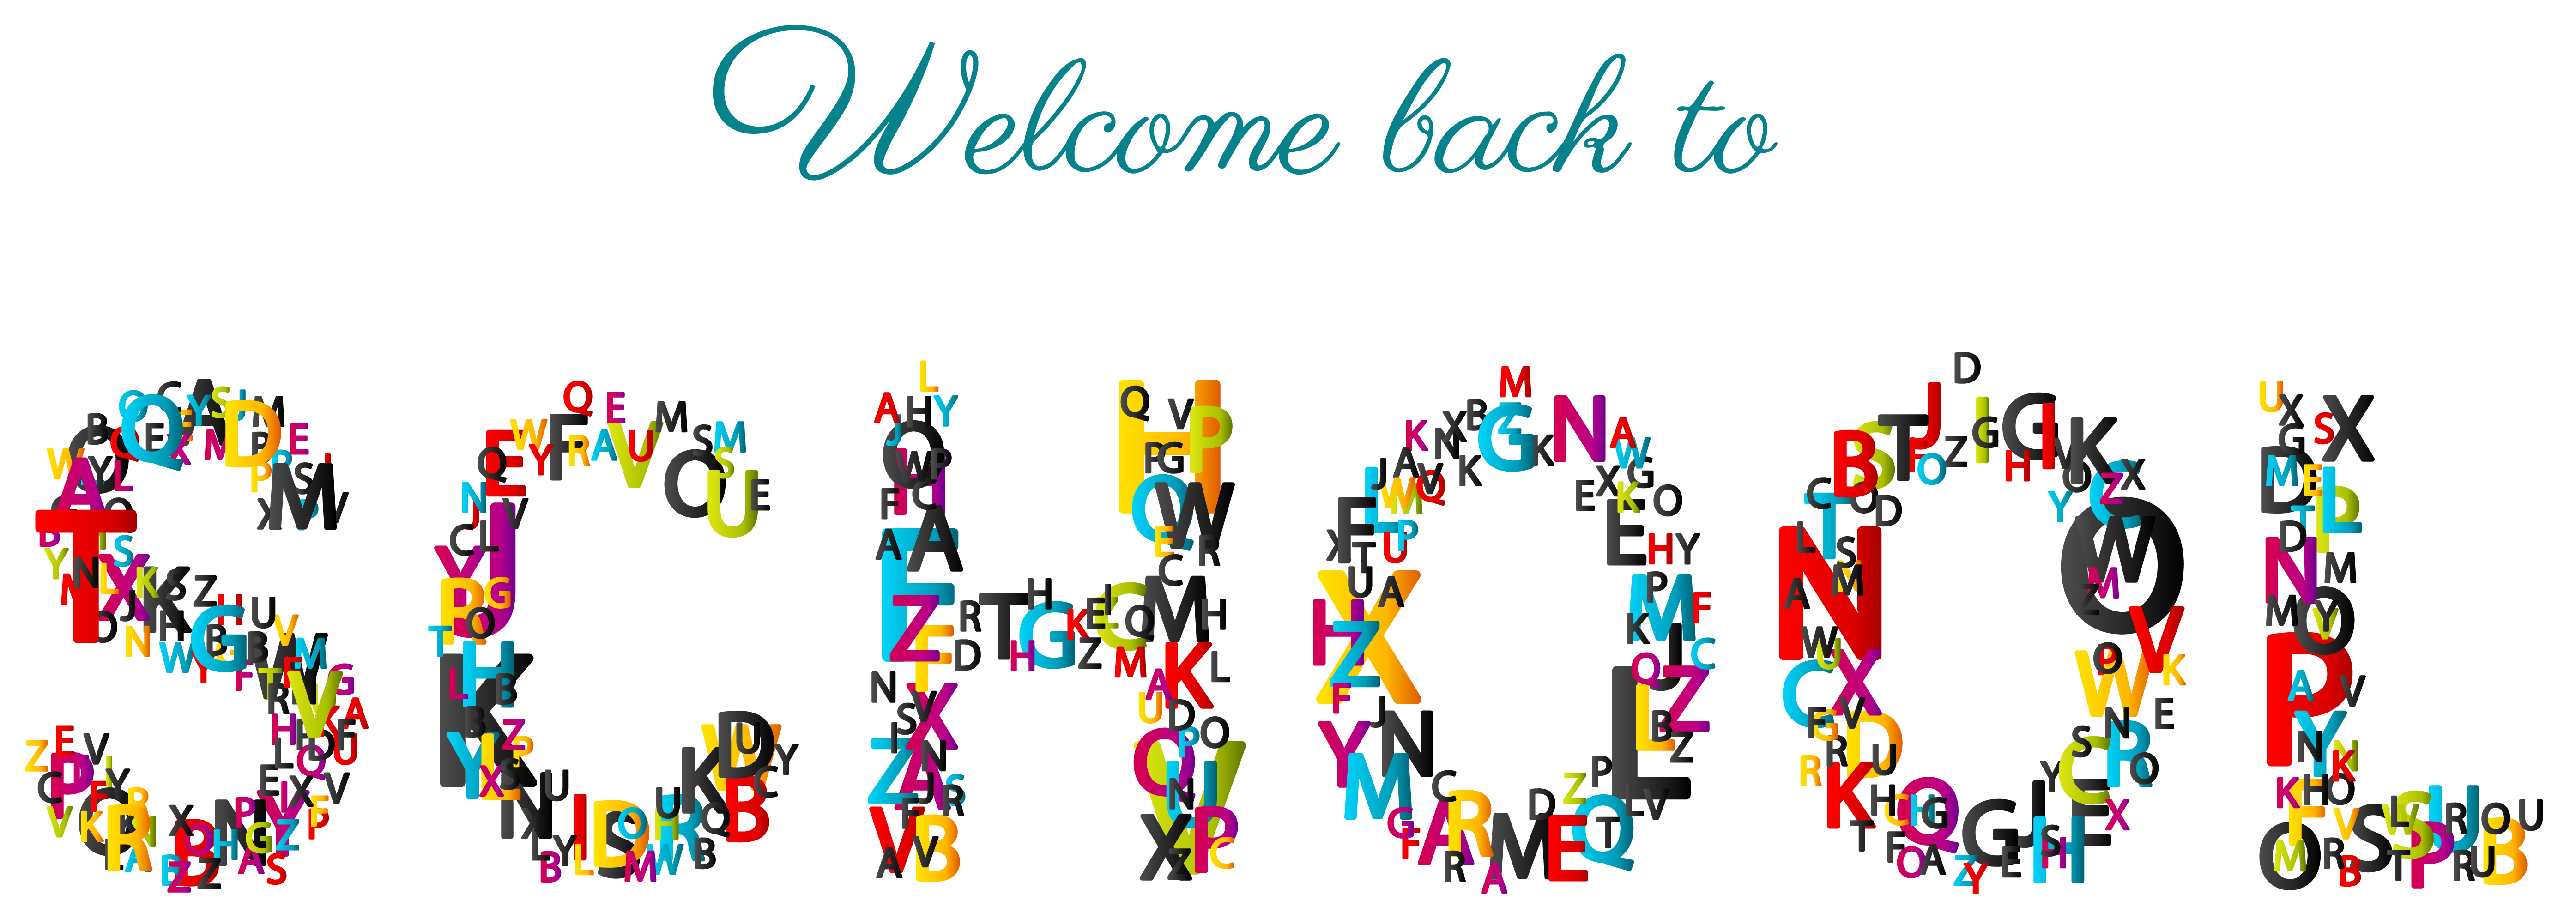 clipart of back to school - photo #39